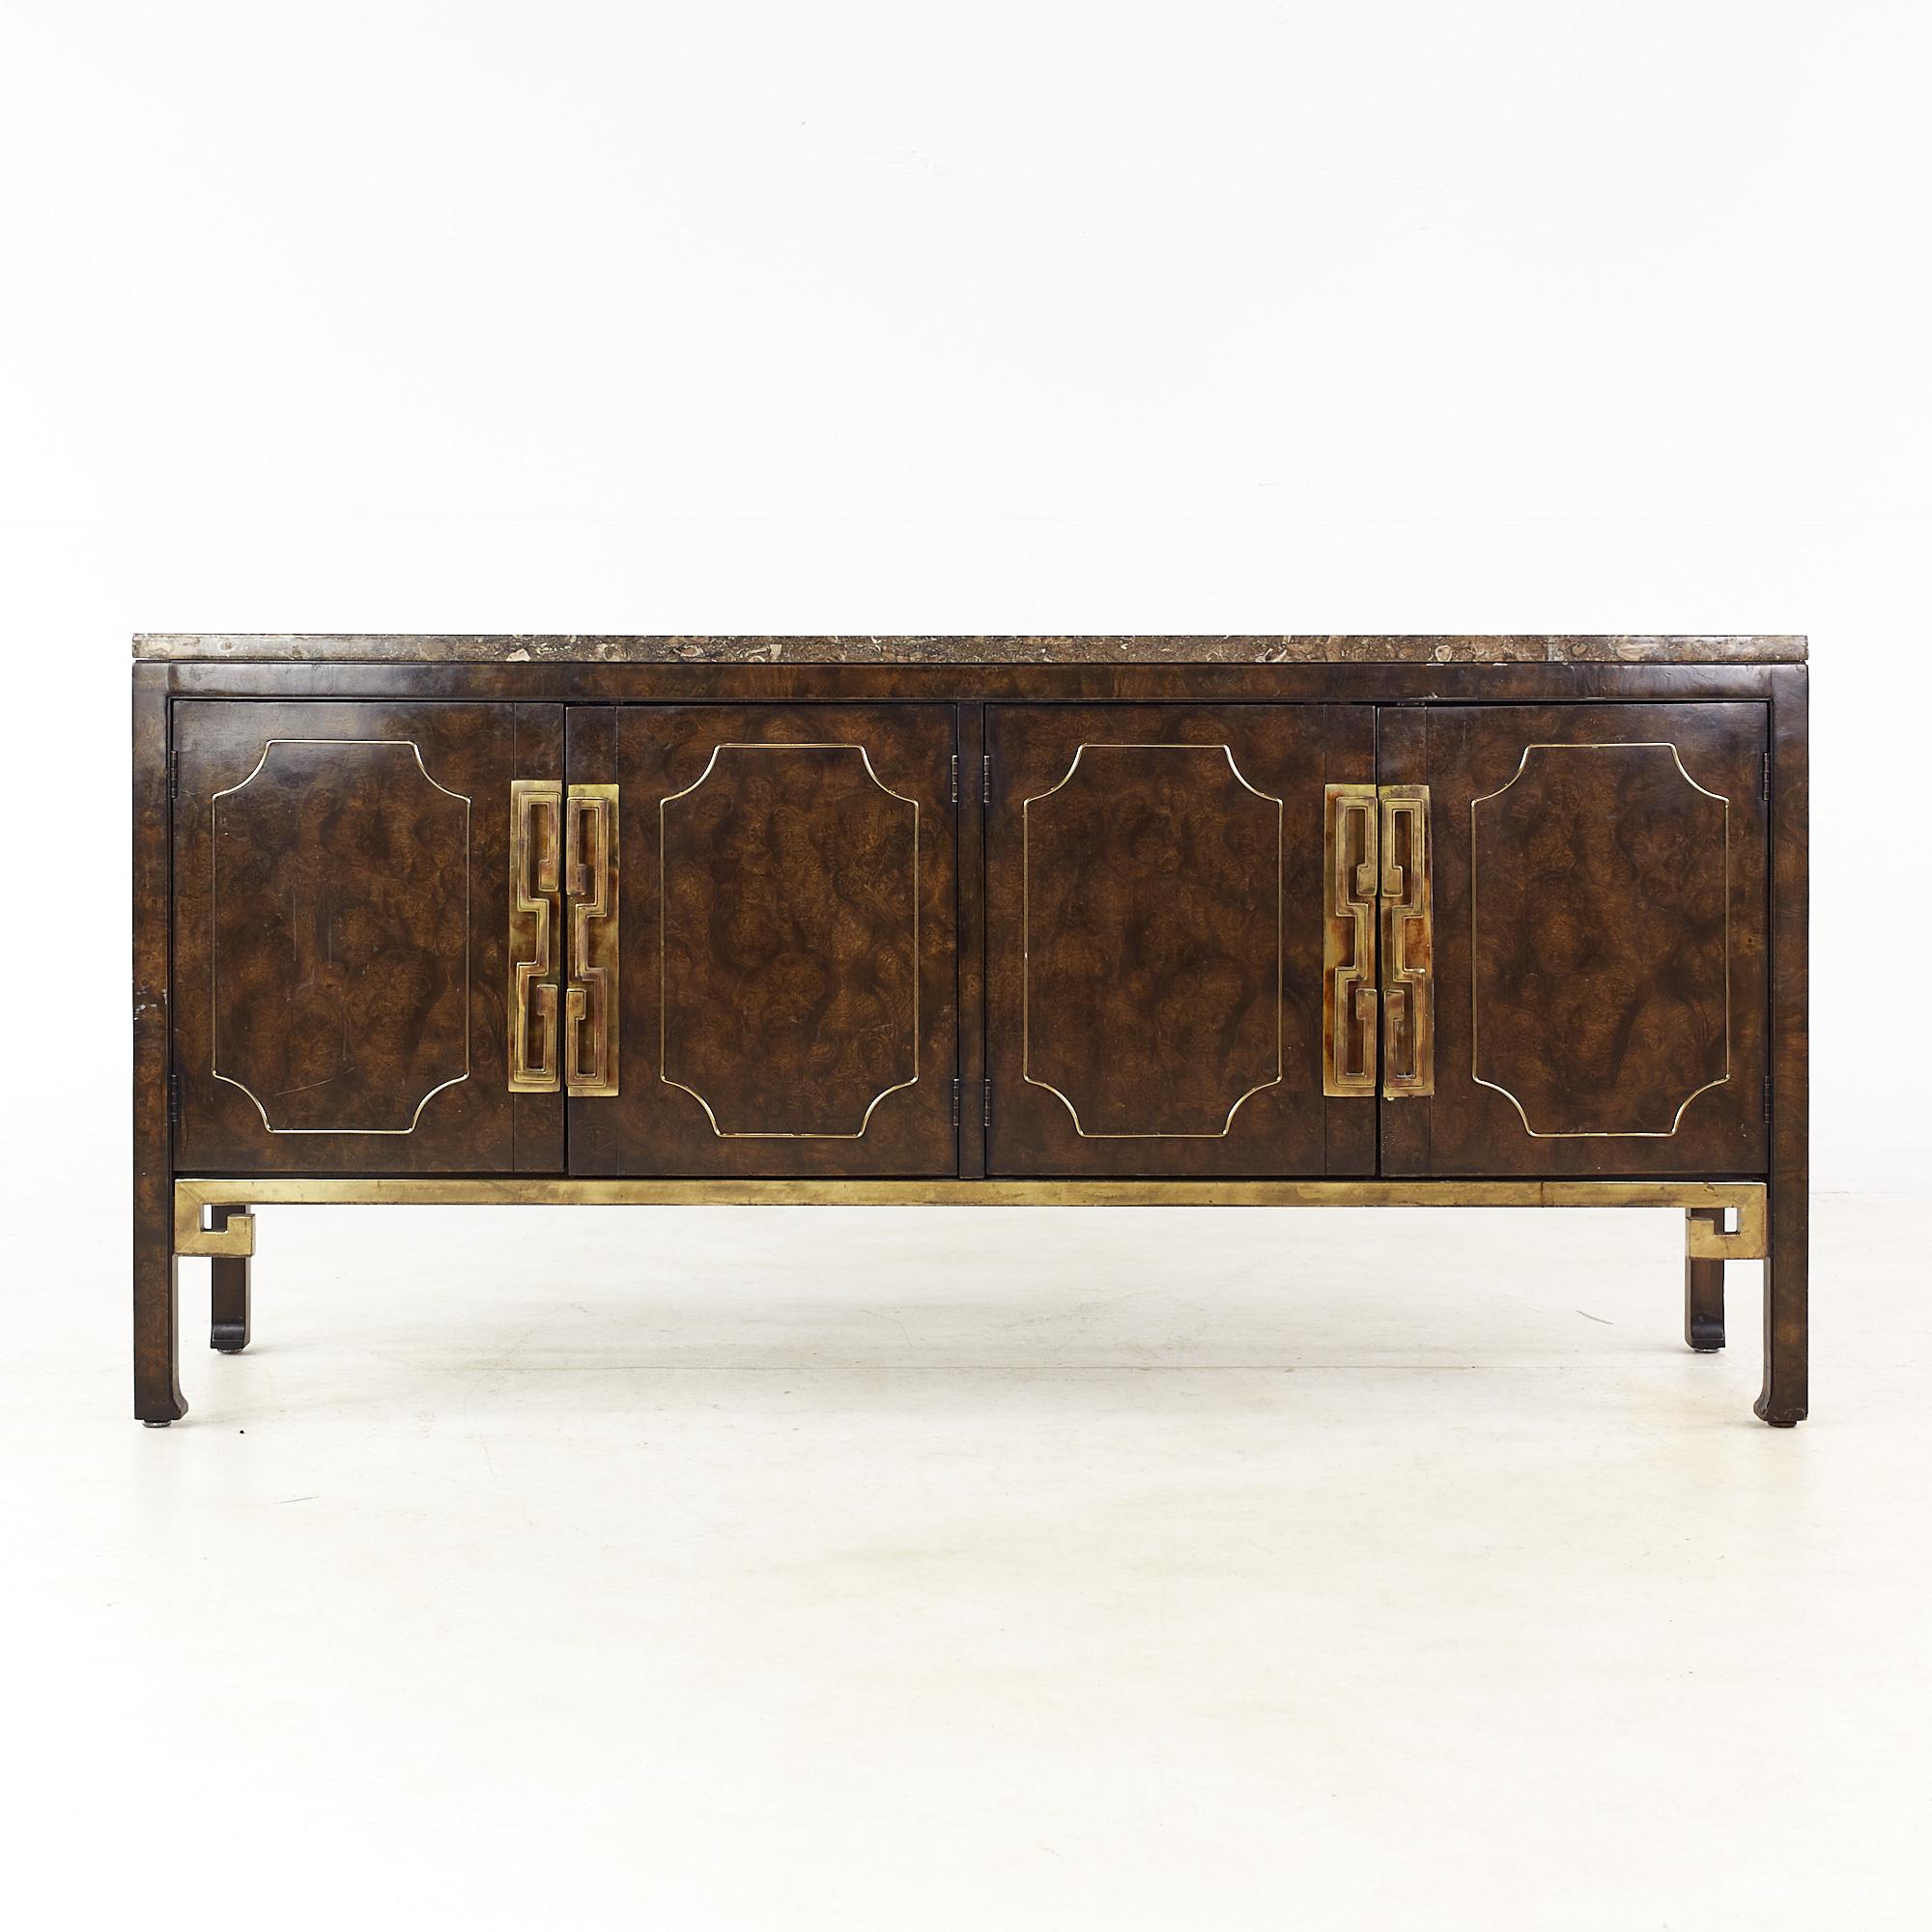 William Doezema for Mastercraft Mid Century Burlwood and Brass Inlay Buffet Credenza

This credenza measures: 64 wide x 18 deep x 30 inches high

All pieces of furniture can be had in what we call restored vintage condition. That means the piece is